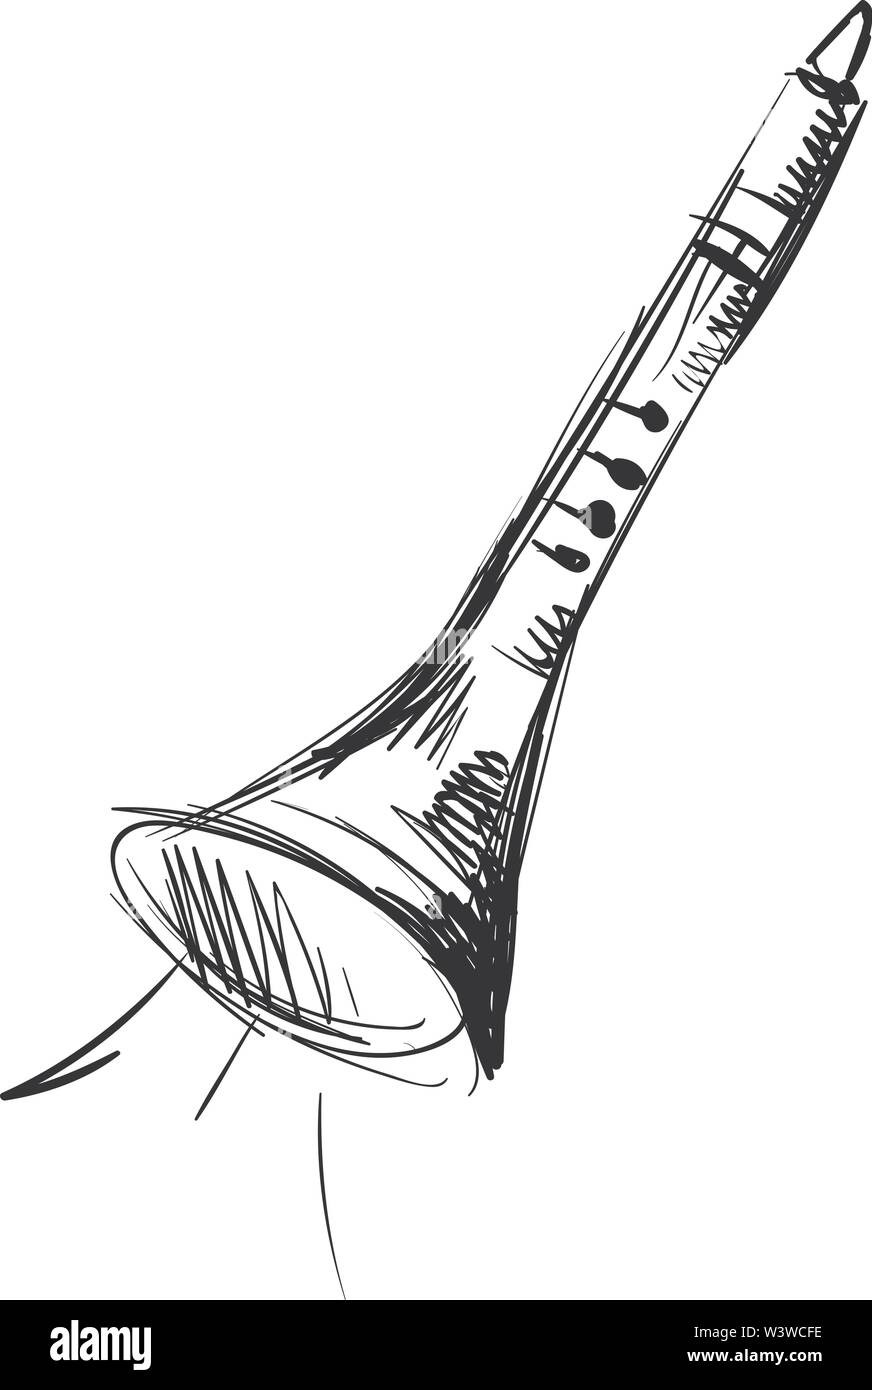 Clarinet drawing Black and White Stock Photos & Images - Alamy